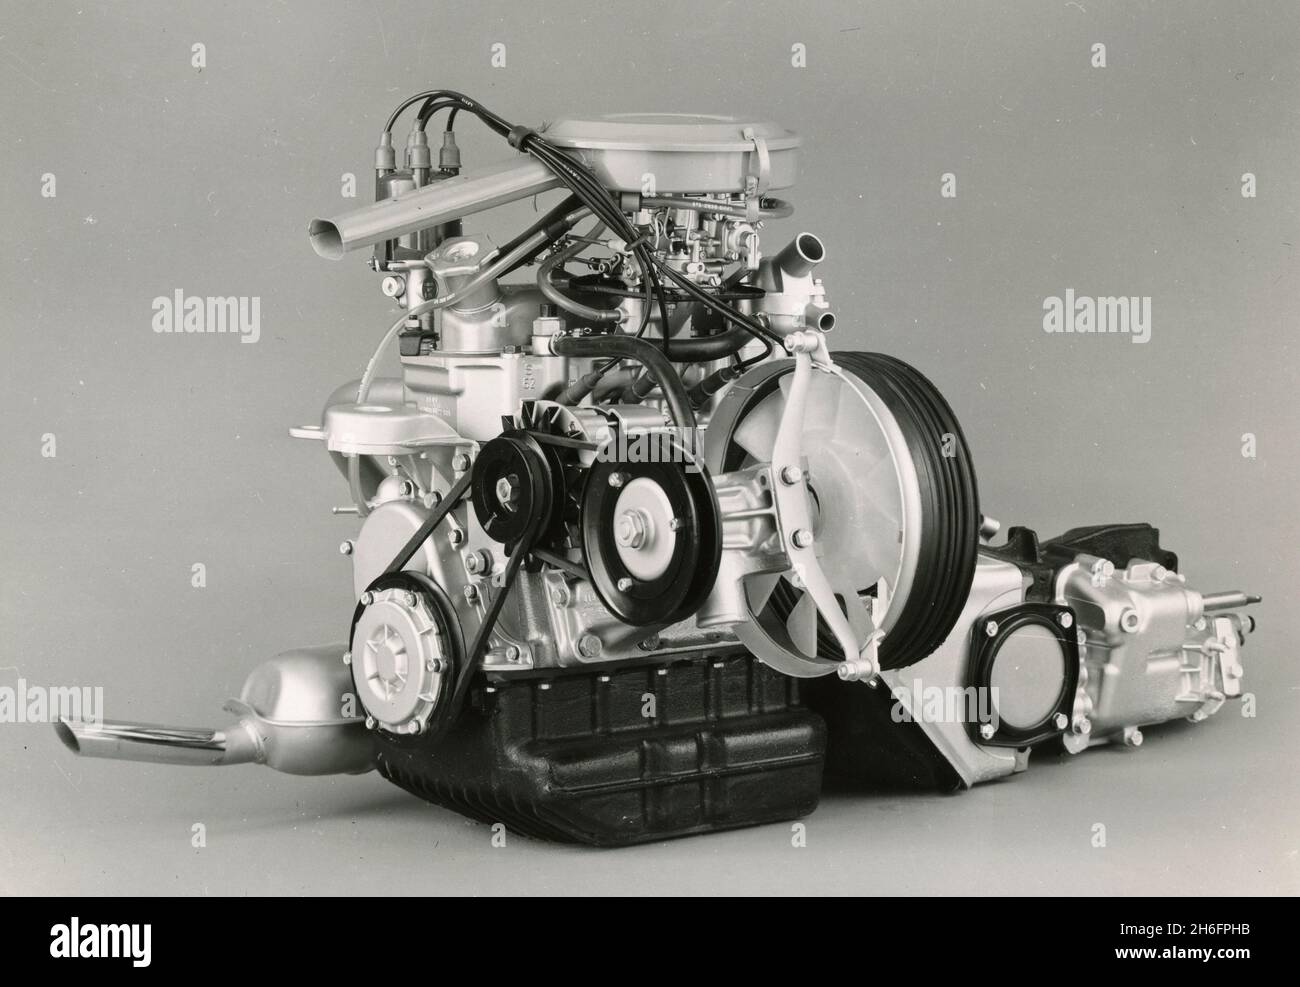 View of the engine of a FIAT 850 Sport car, Italy 1968 Stock Photo